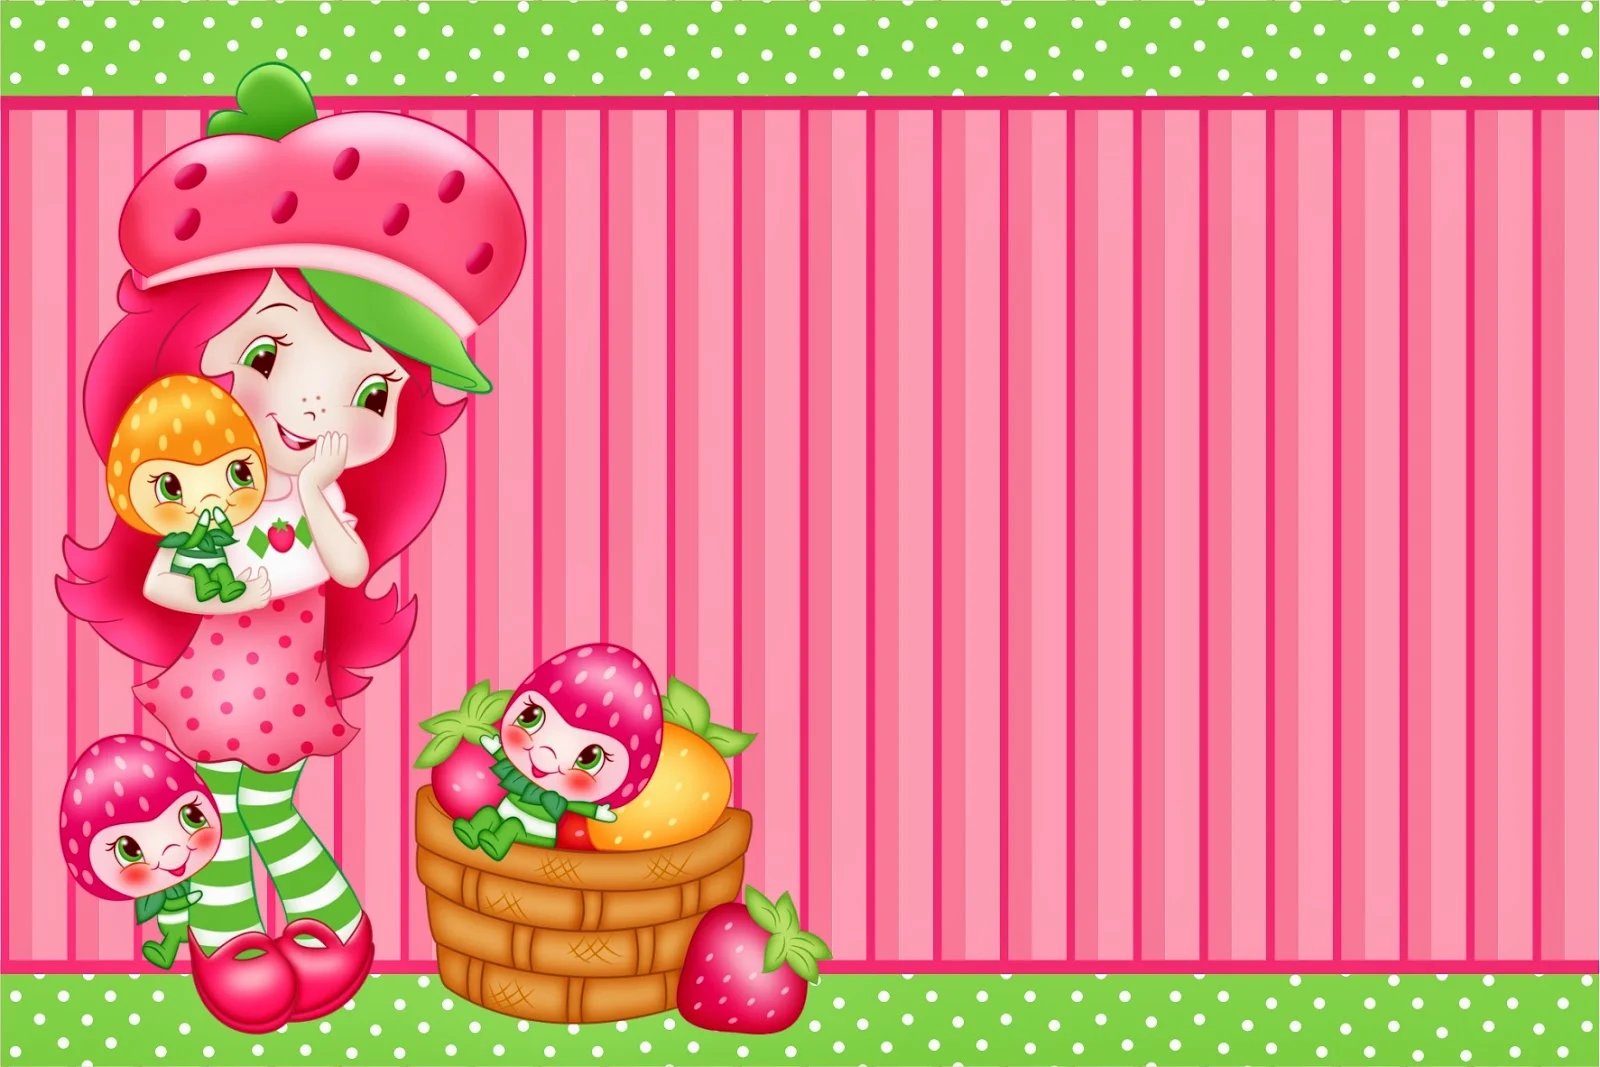 Strawberry Shortcake free printable invitation, card, bunting or candy bar label.